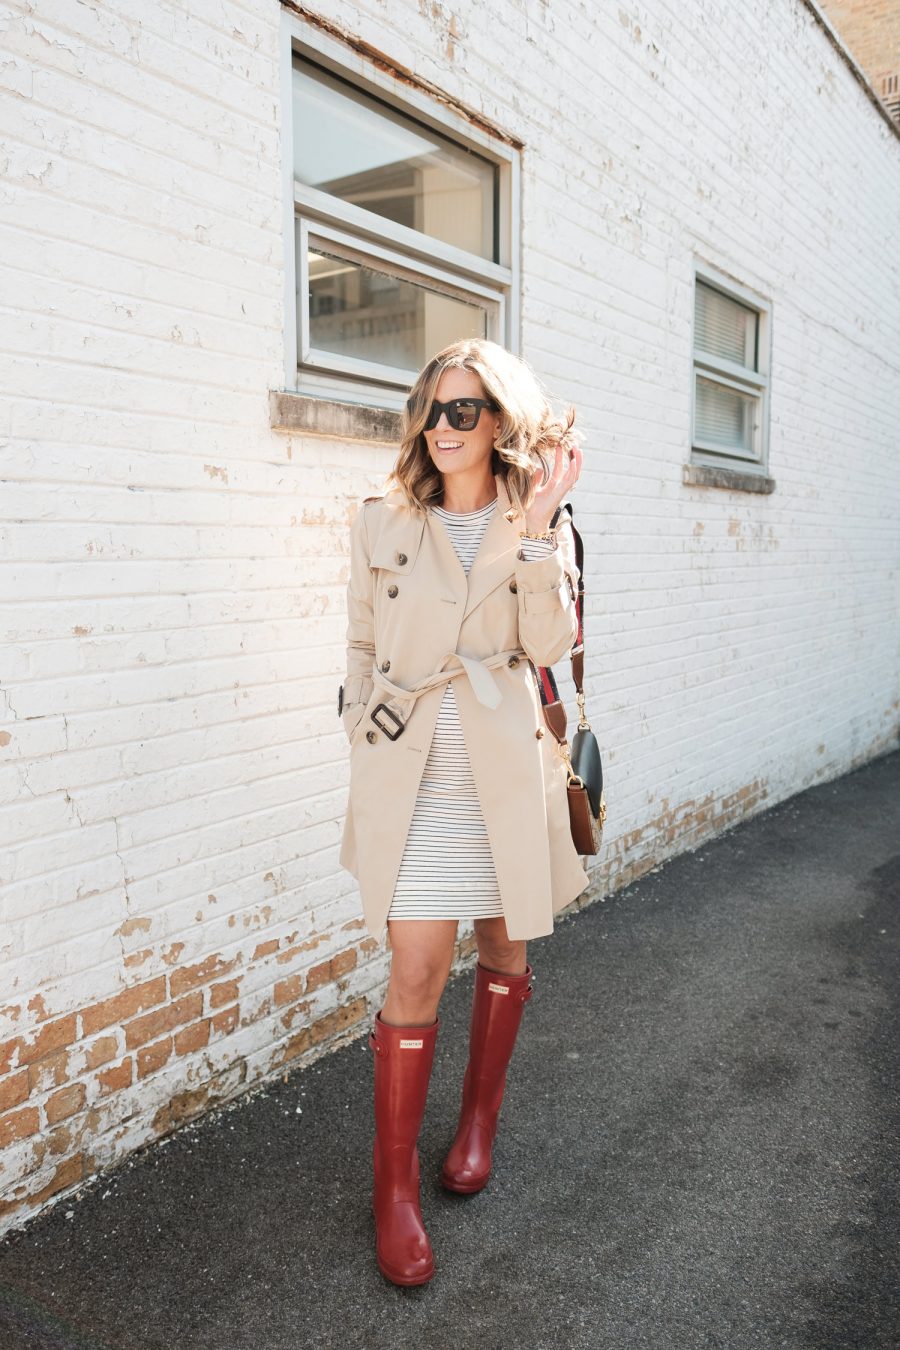 $30 sweatshirt dress with a trench coat, rain boots, and crossbody bag